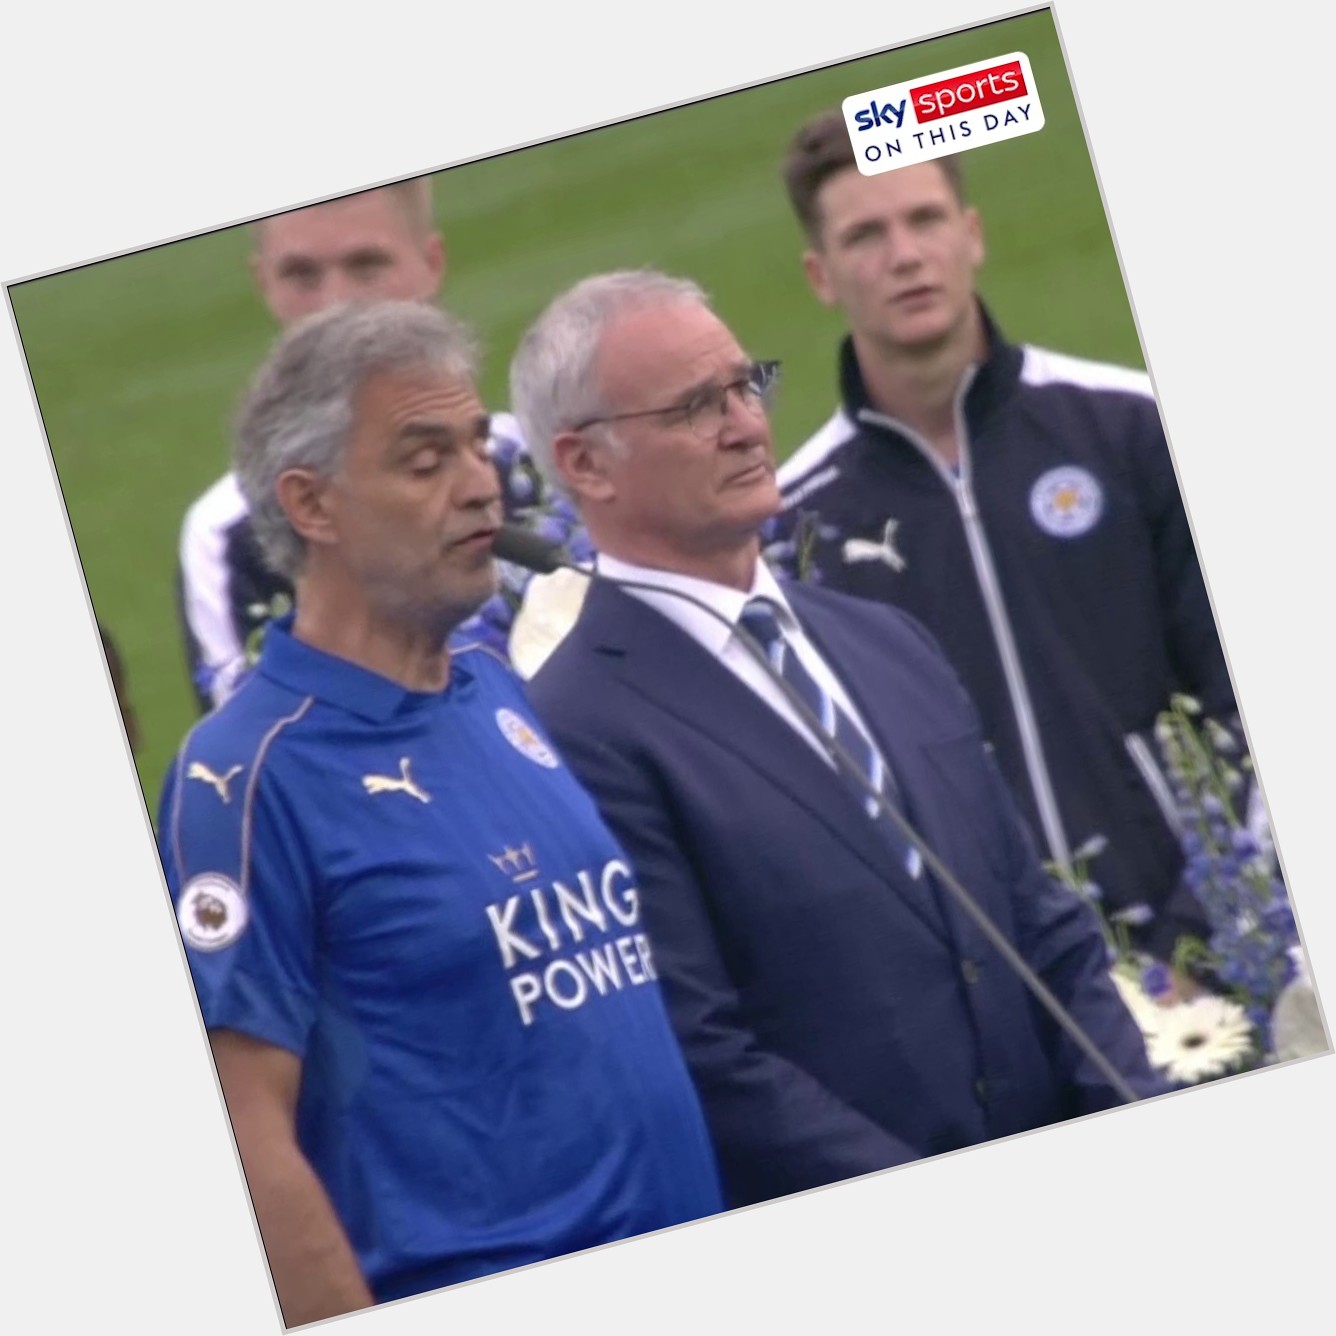 Dilly-ding, dilly-dong. Happy 70th birthday to Claudio Ranieri  